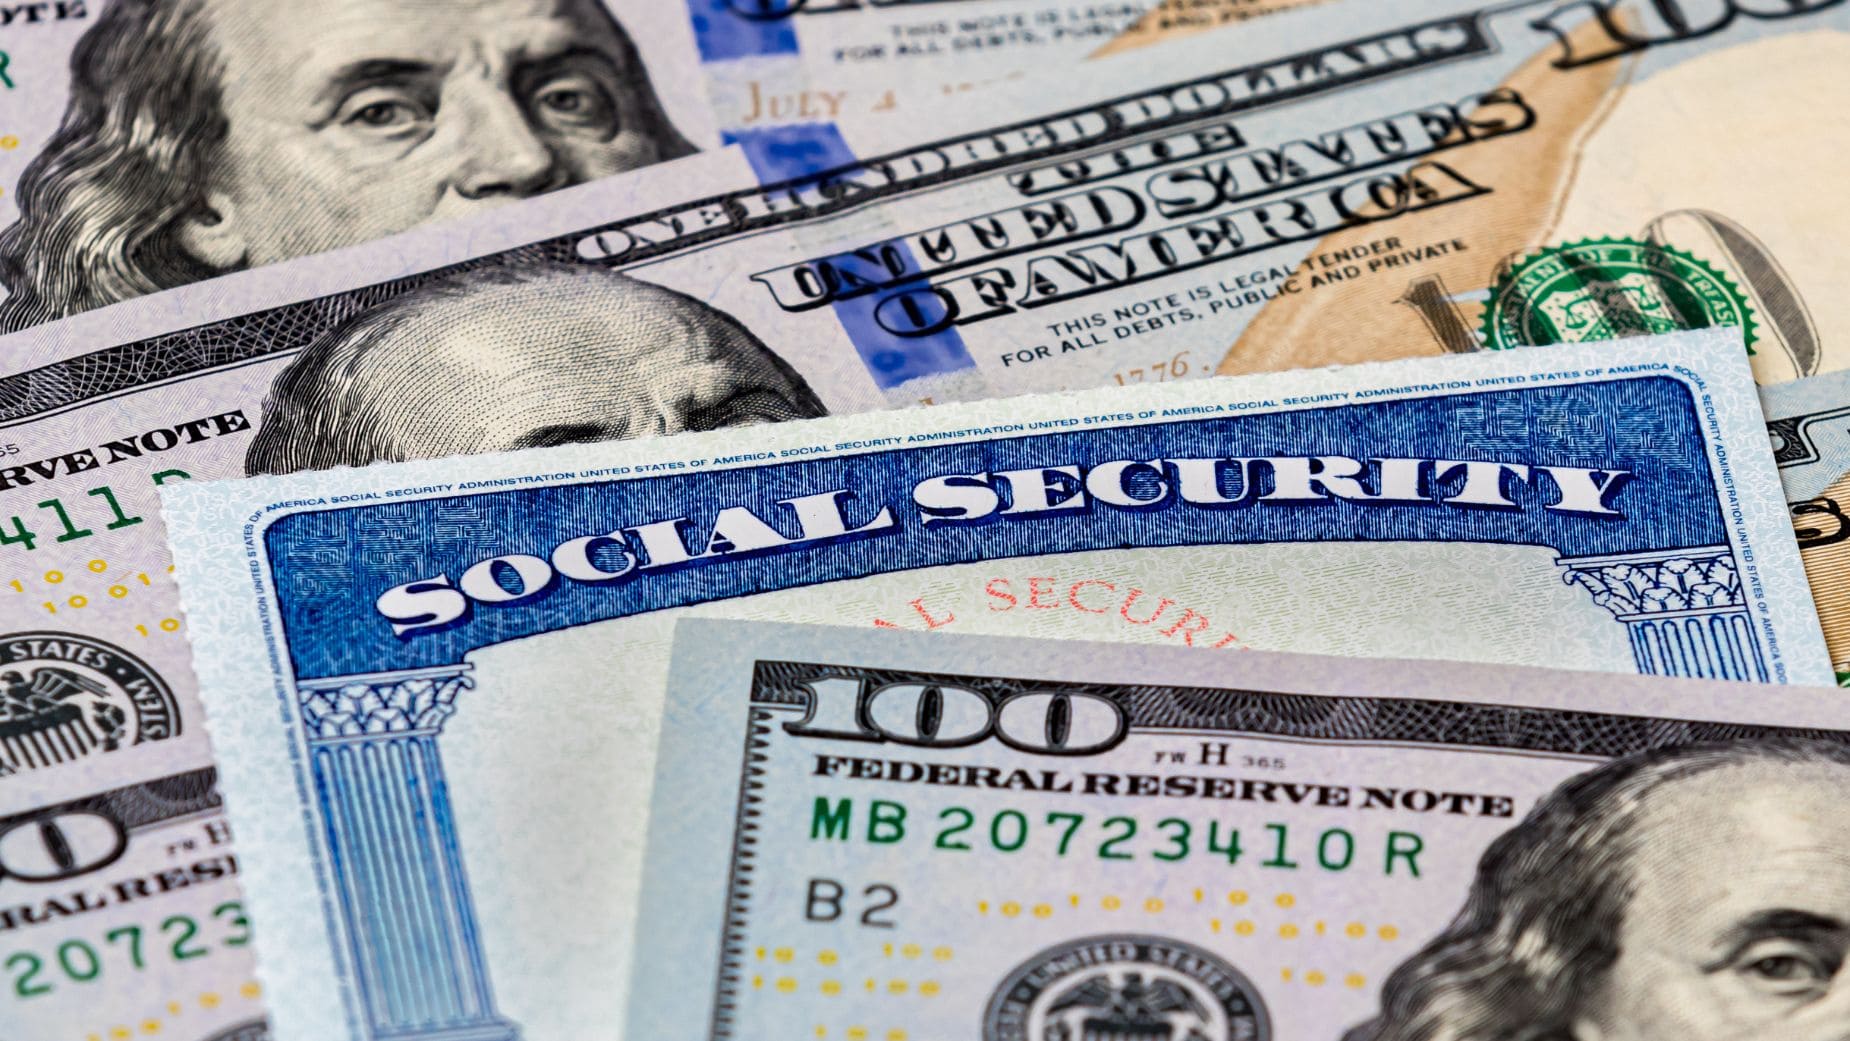 Supplemental Security Income new check will arrive in March